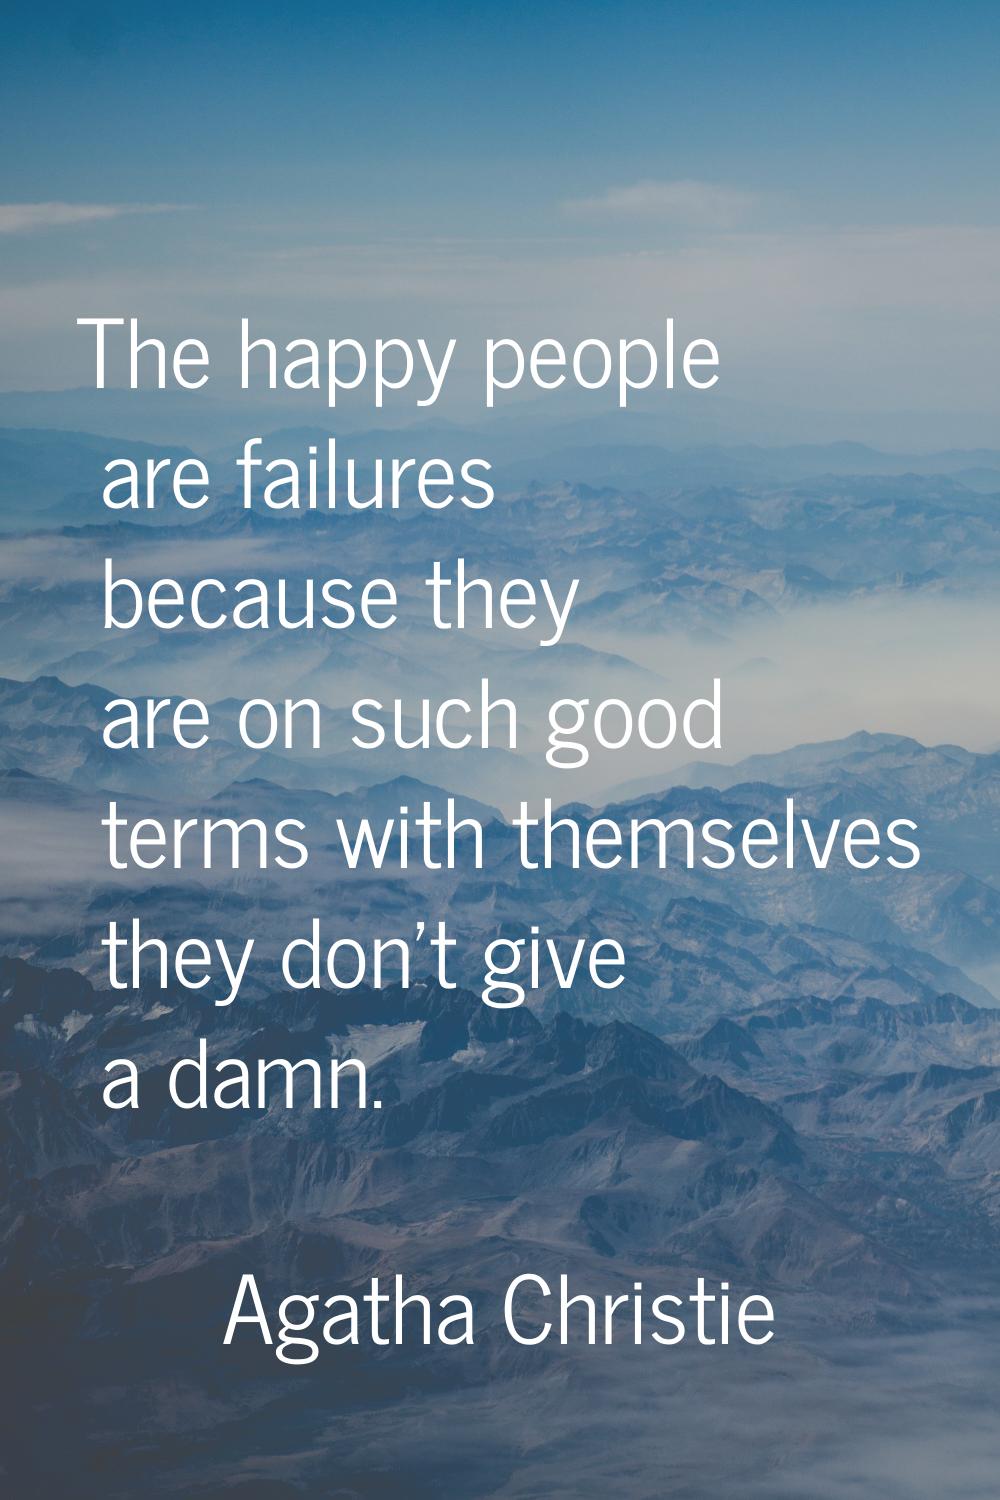 The happy people are failures because they are on such good terms with themselves they don't give a